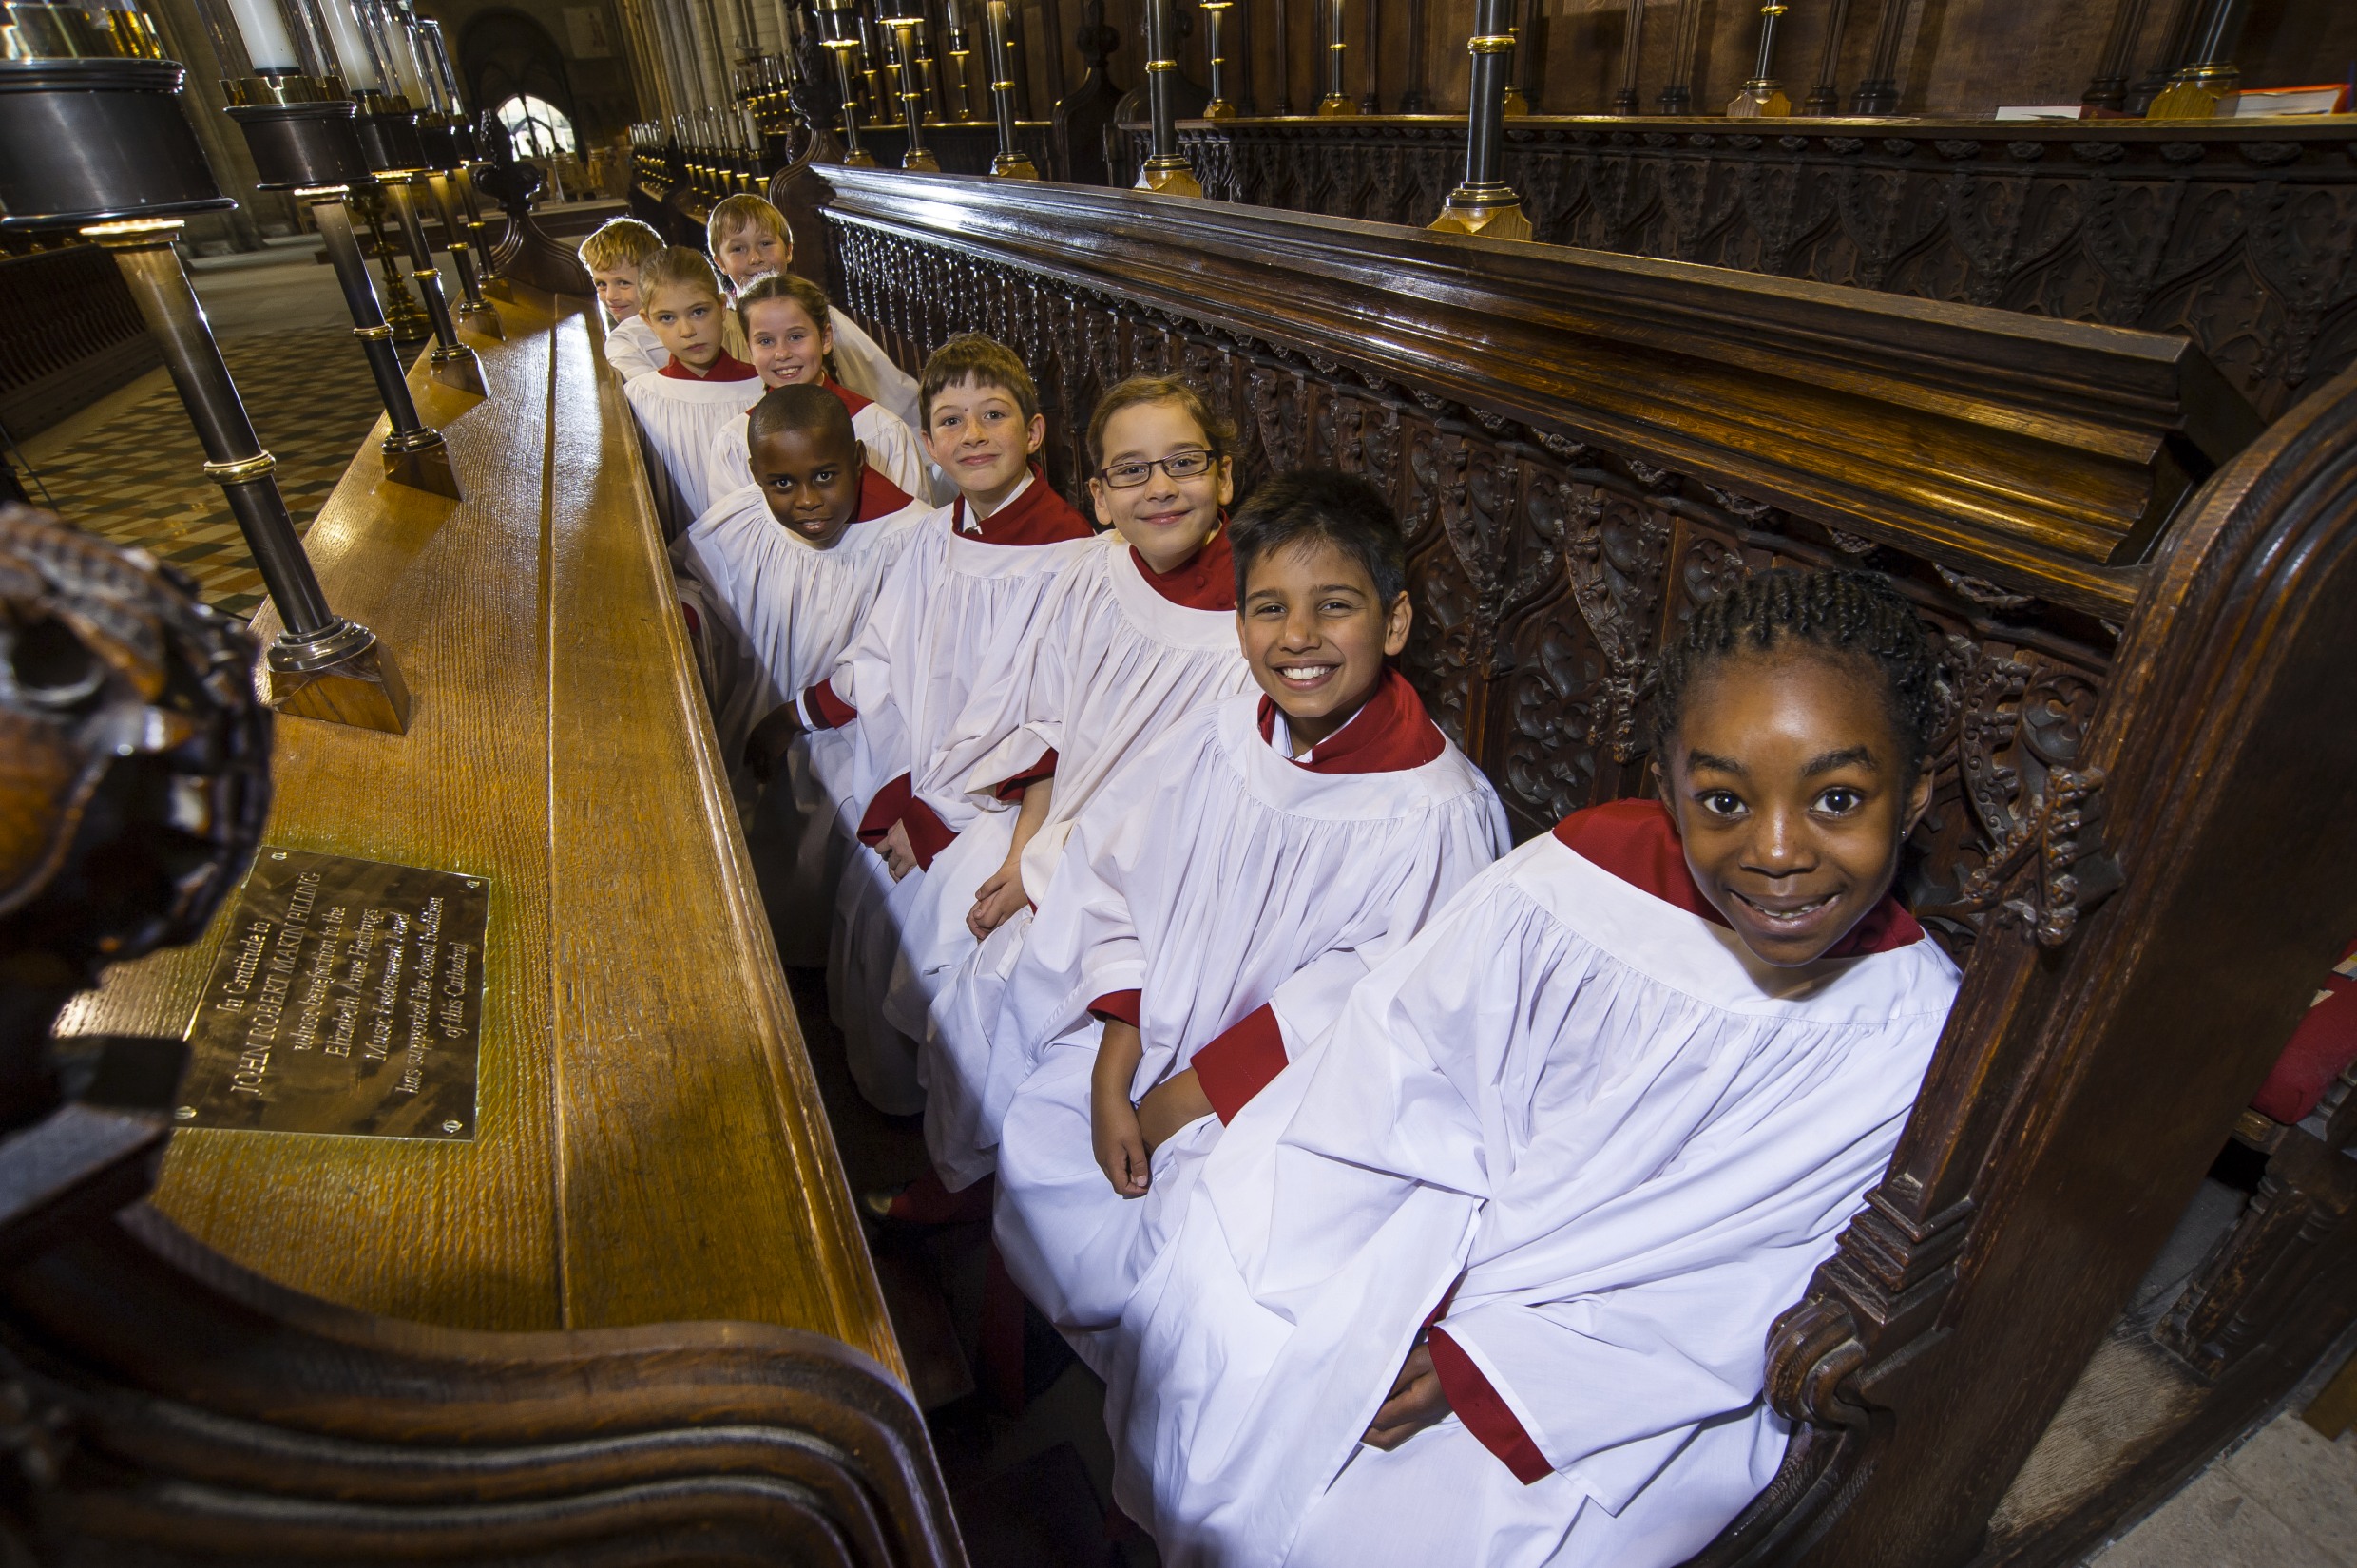 Choristers in the choir stalls